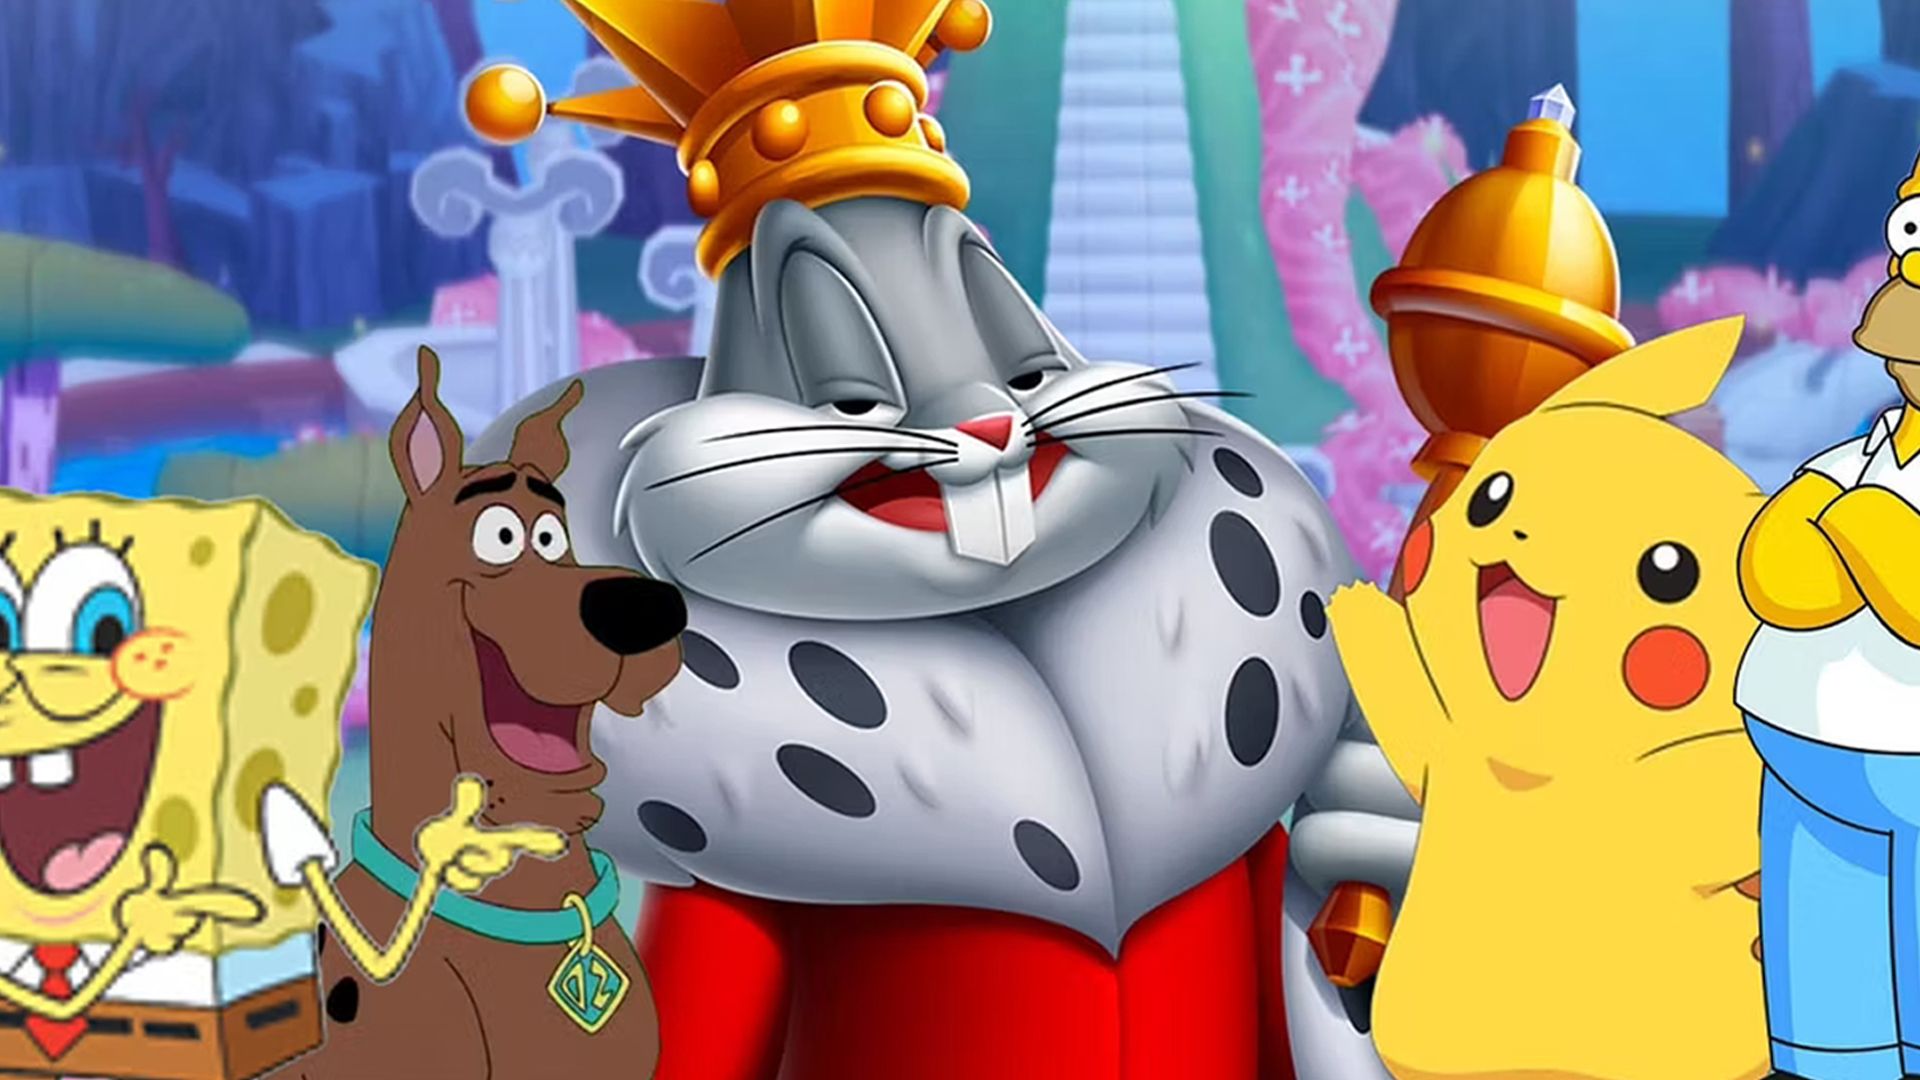 List of 10 best cartoon characters with big heads, ranked 